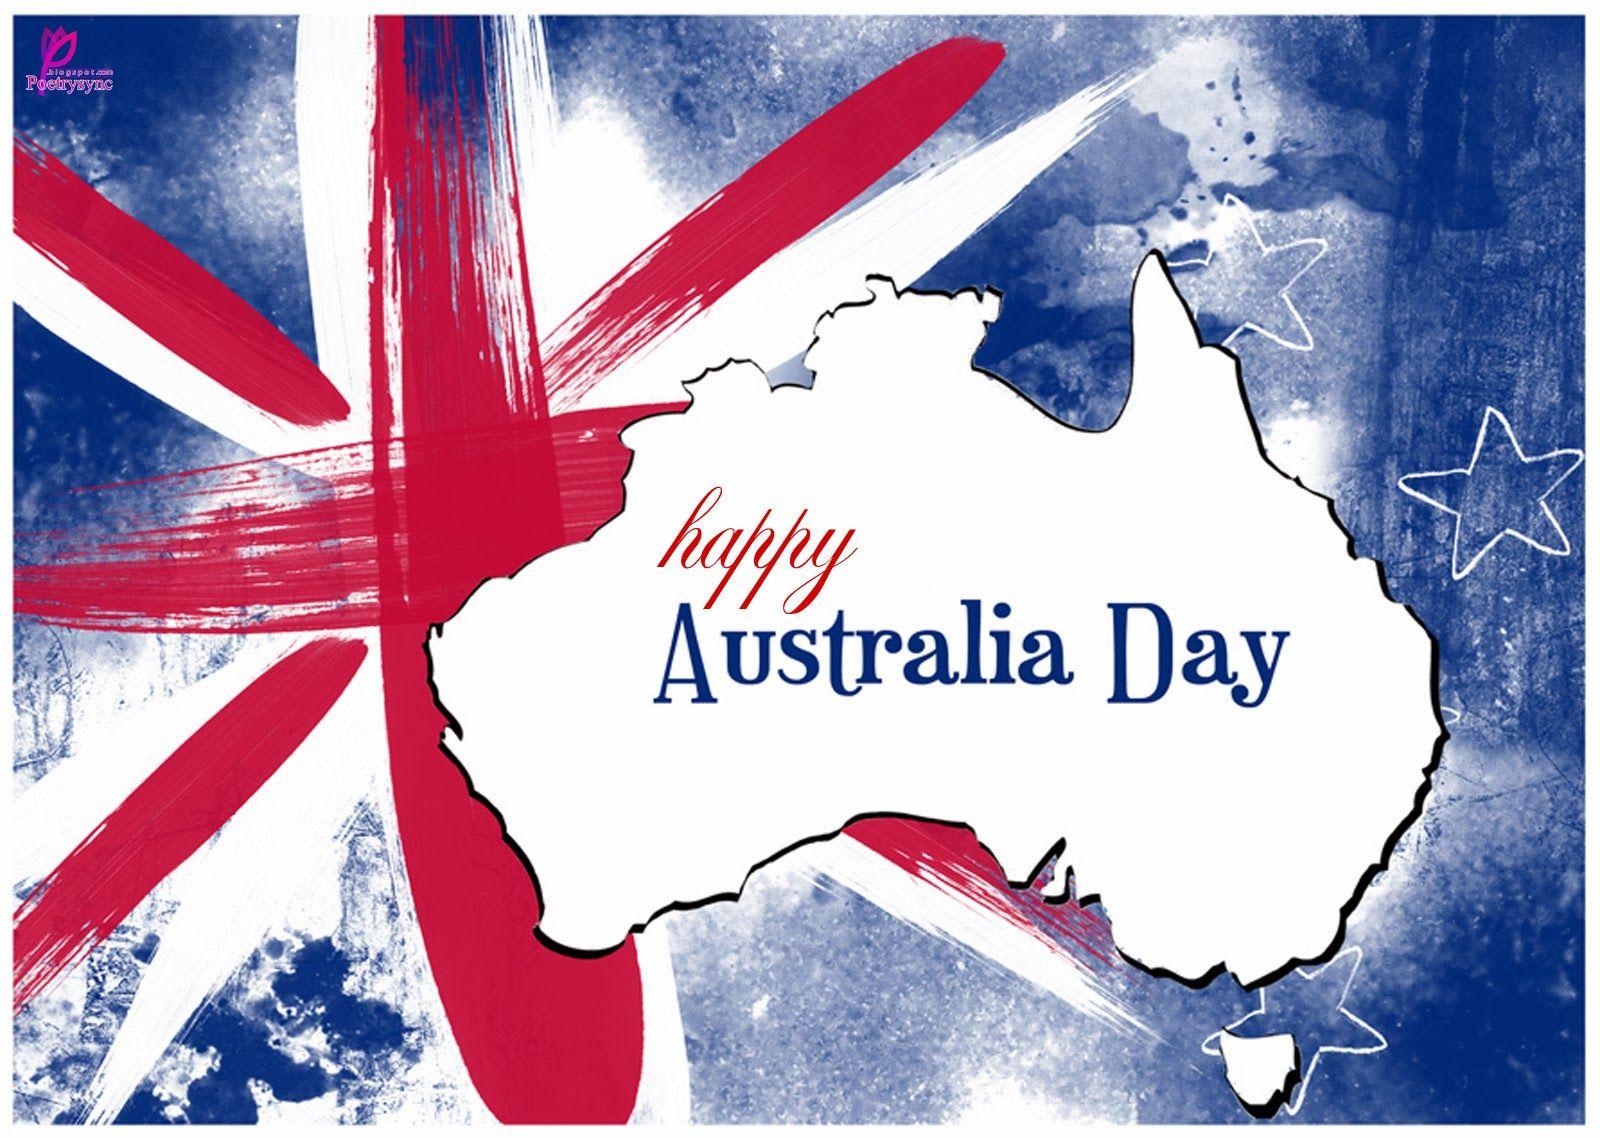 image about Australia Day. Facebook, February